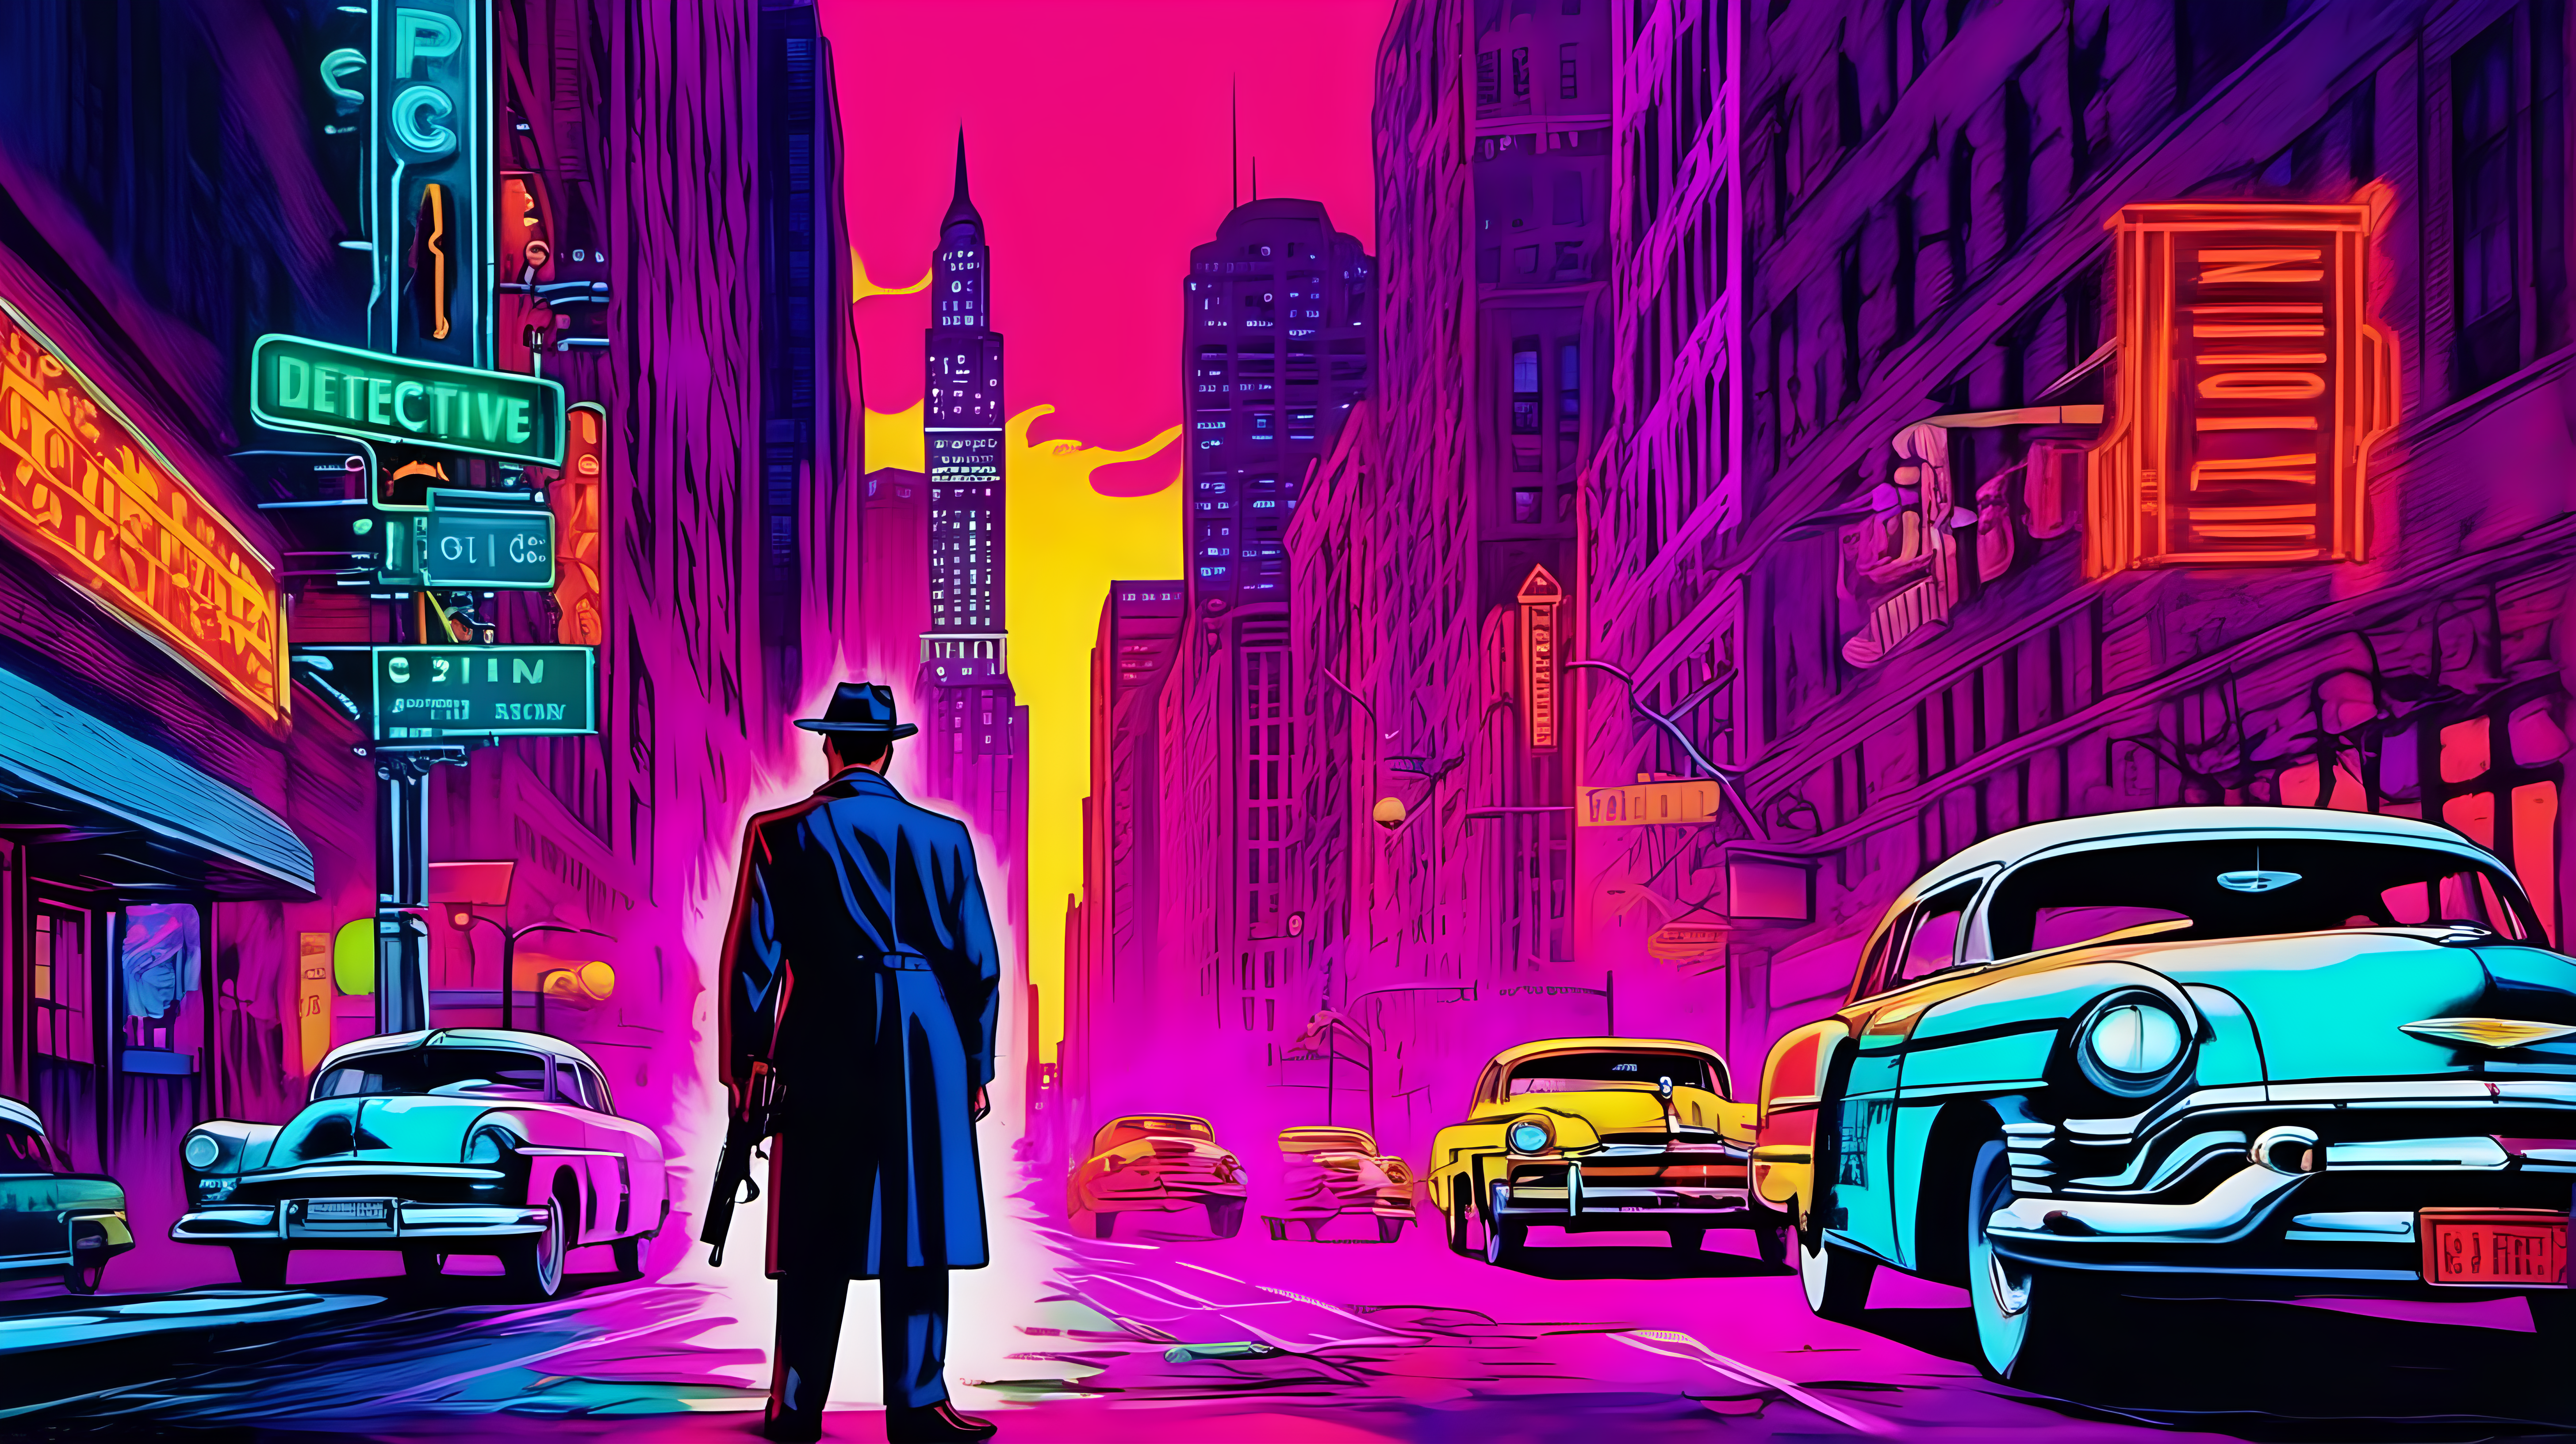 A detective with a rifle staring at the camera in the foreground on a downtown neon Chicago street, circa 1950. Colorful Luminism style.